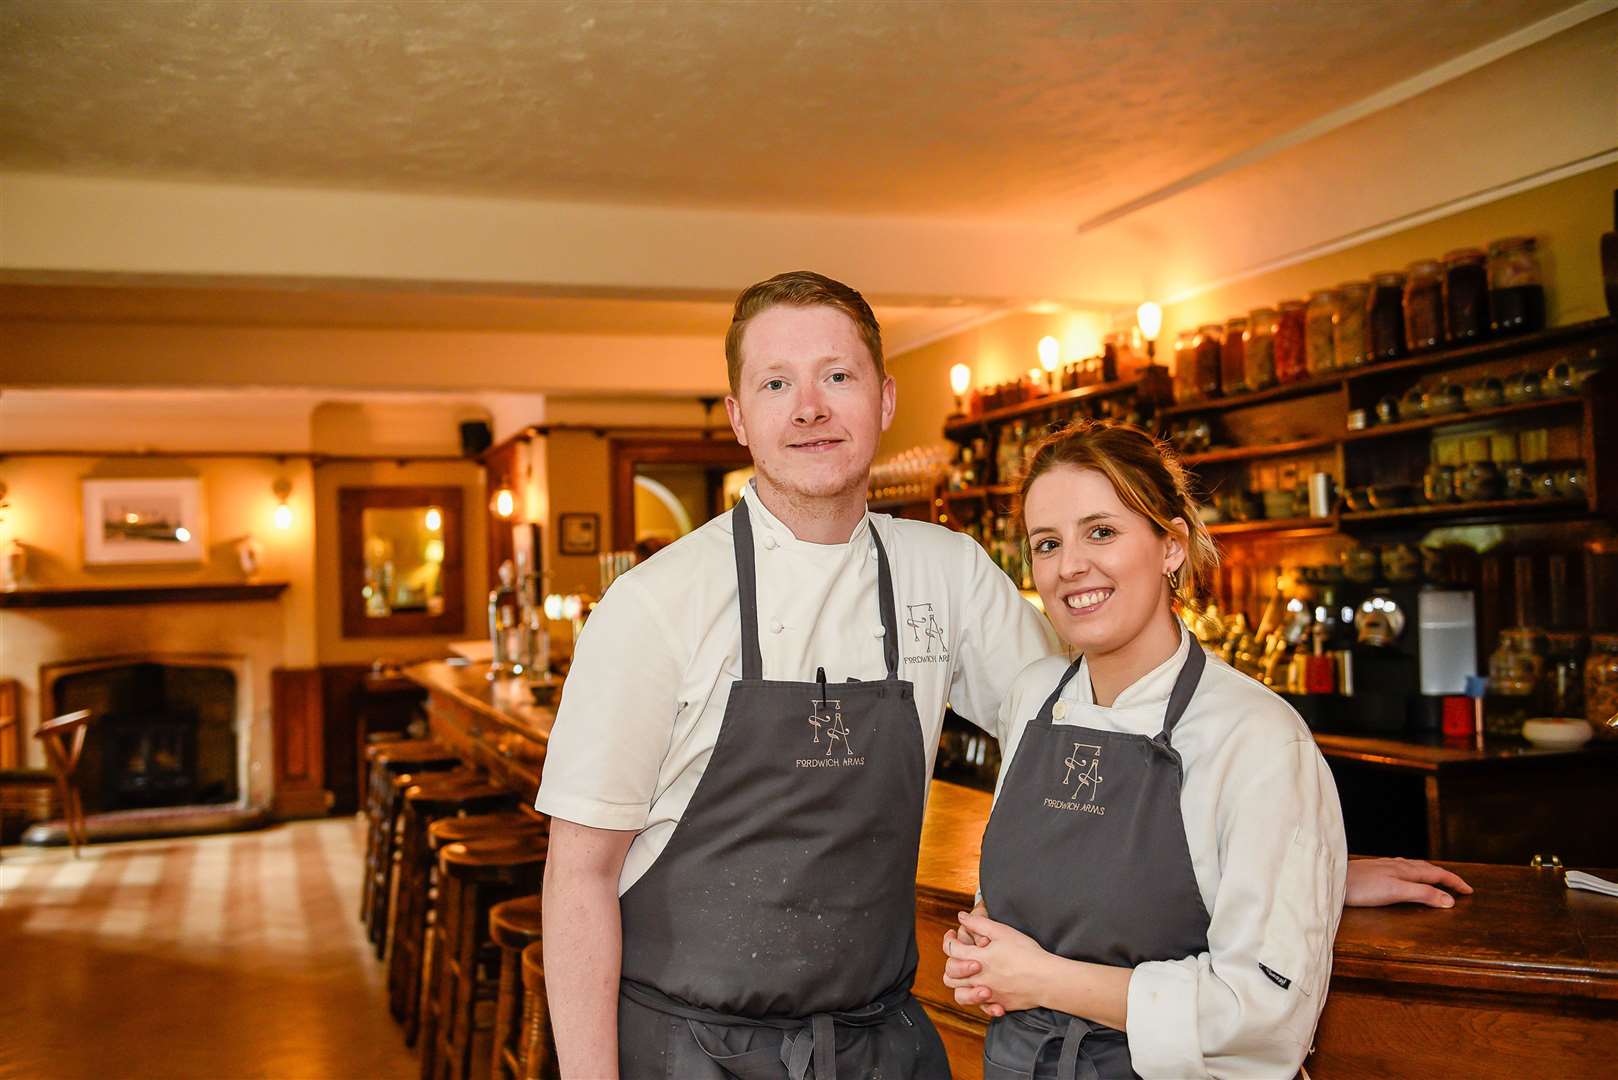 Dan Smith runs the Fordwich Arms with his wife Natasha